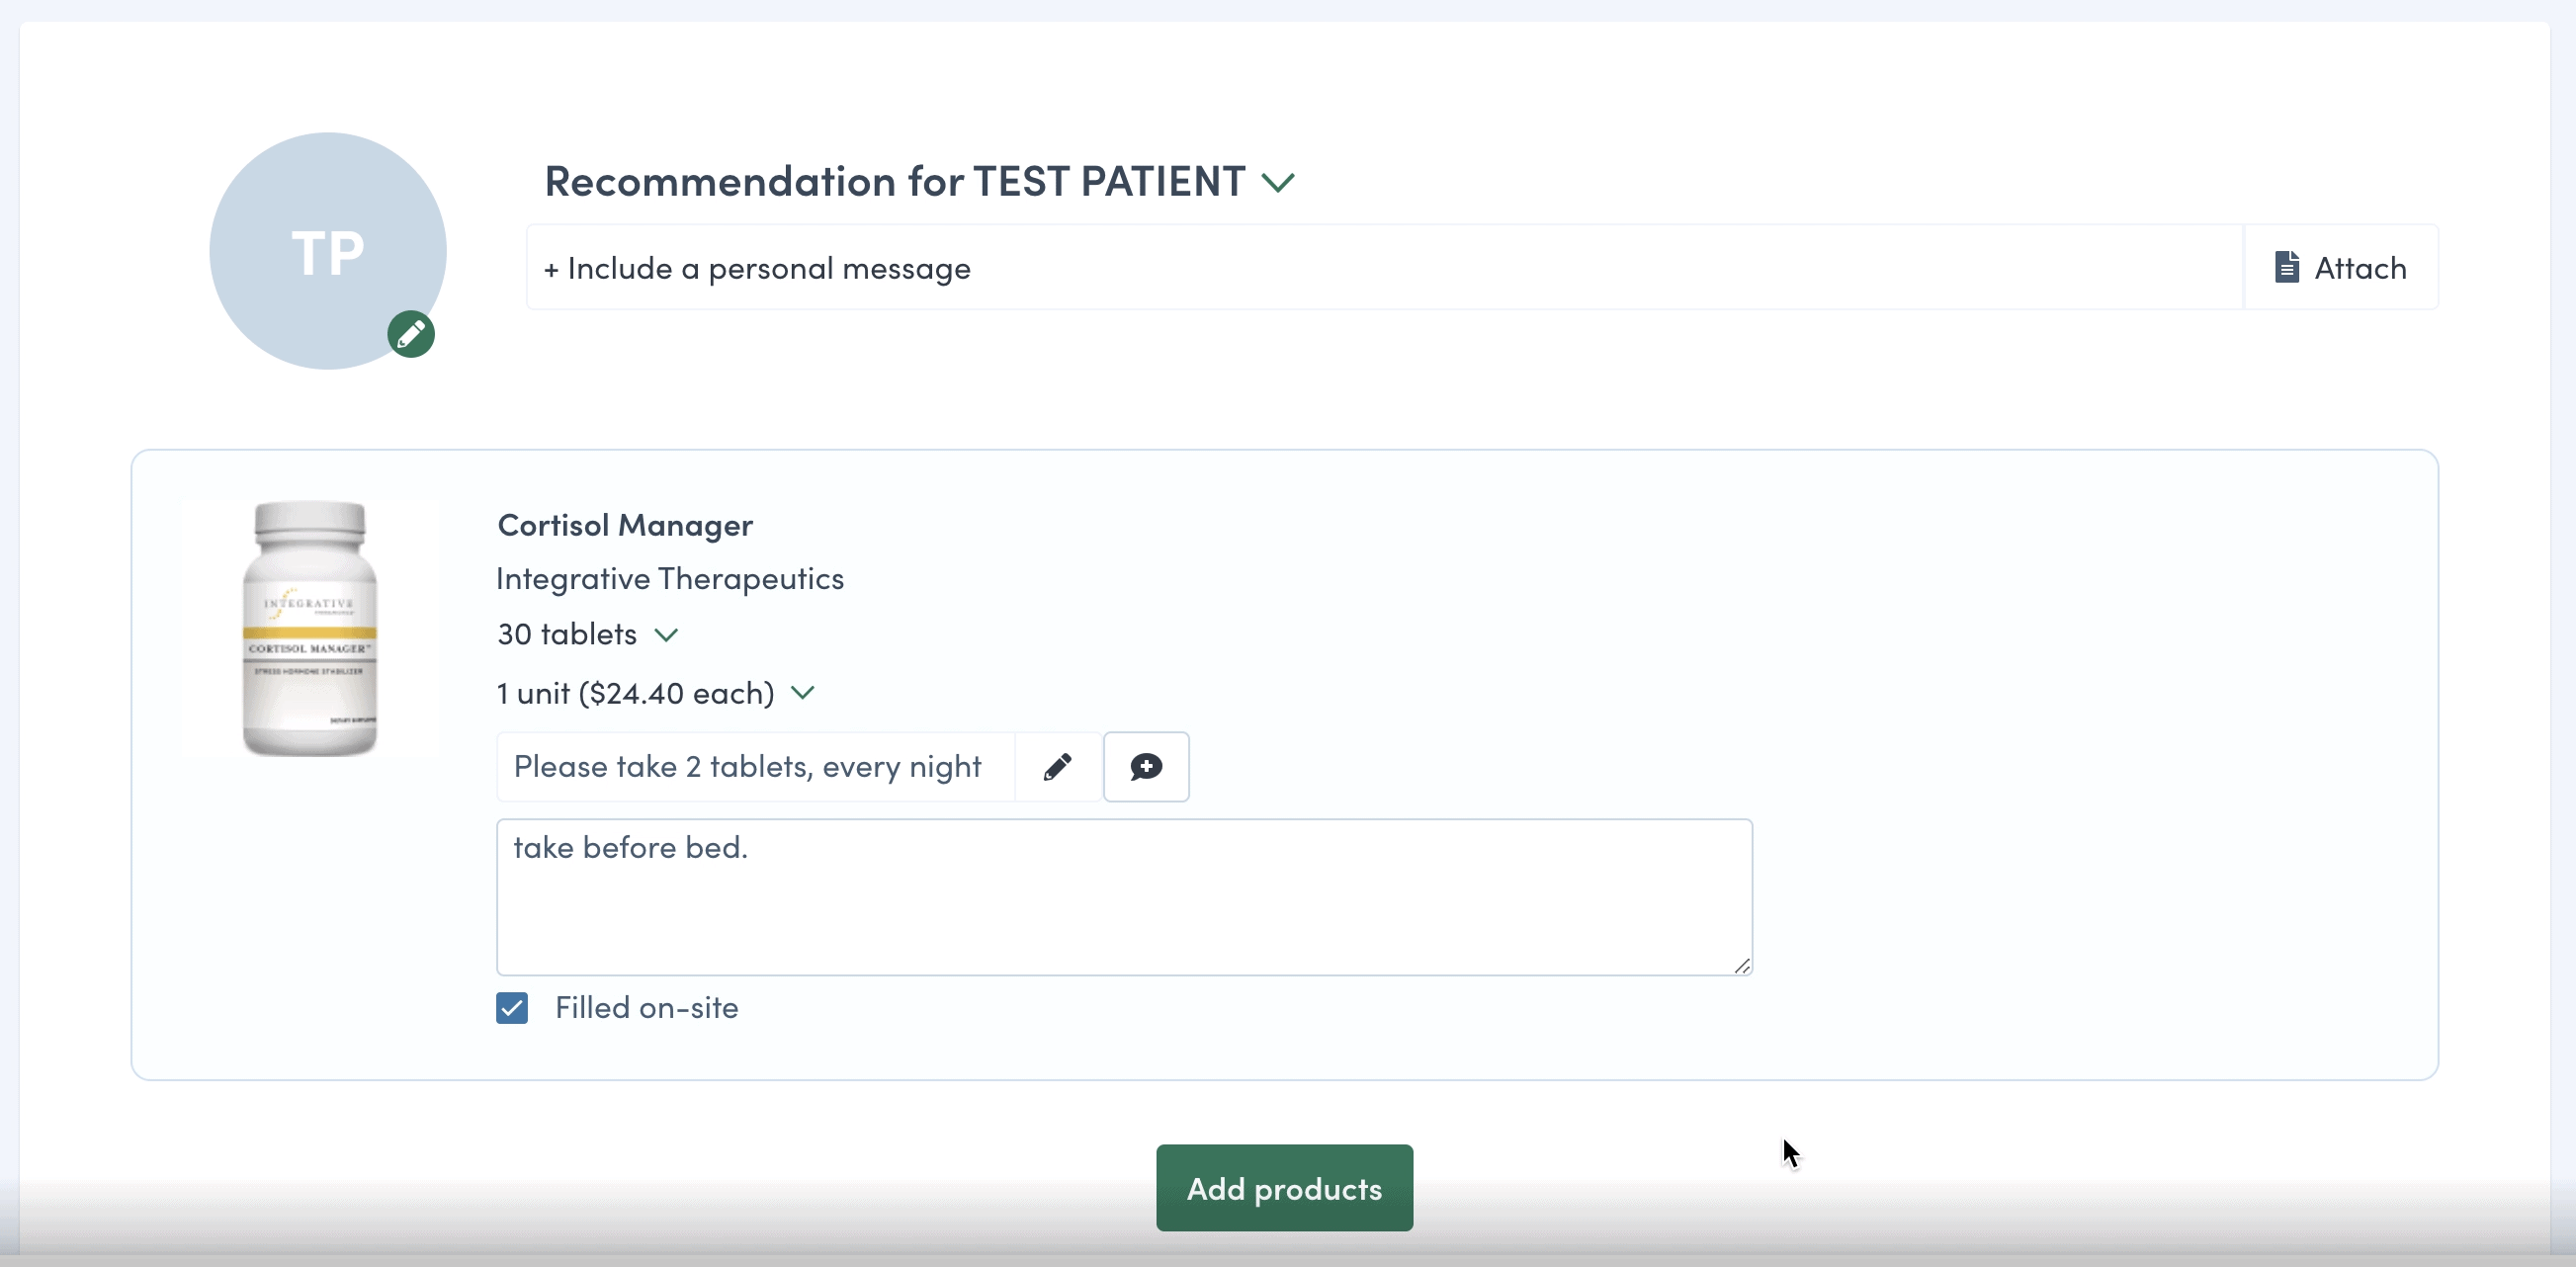 Filled on site check box in Fullscript recommendation view